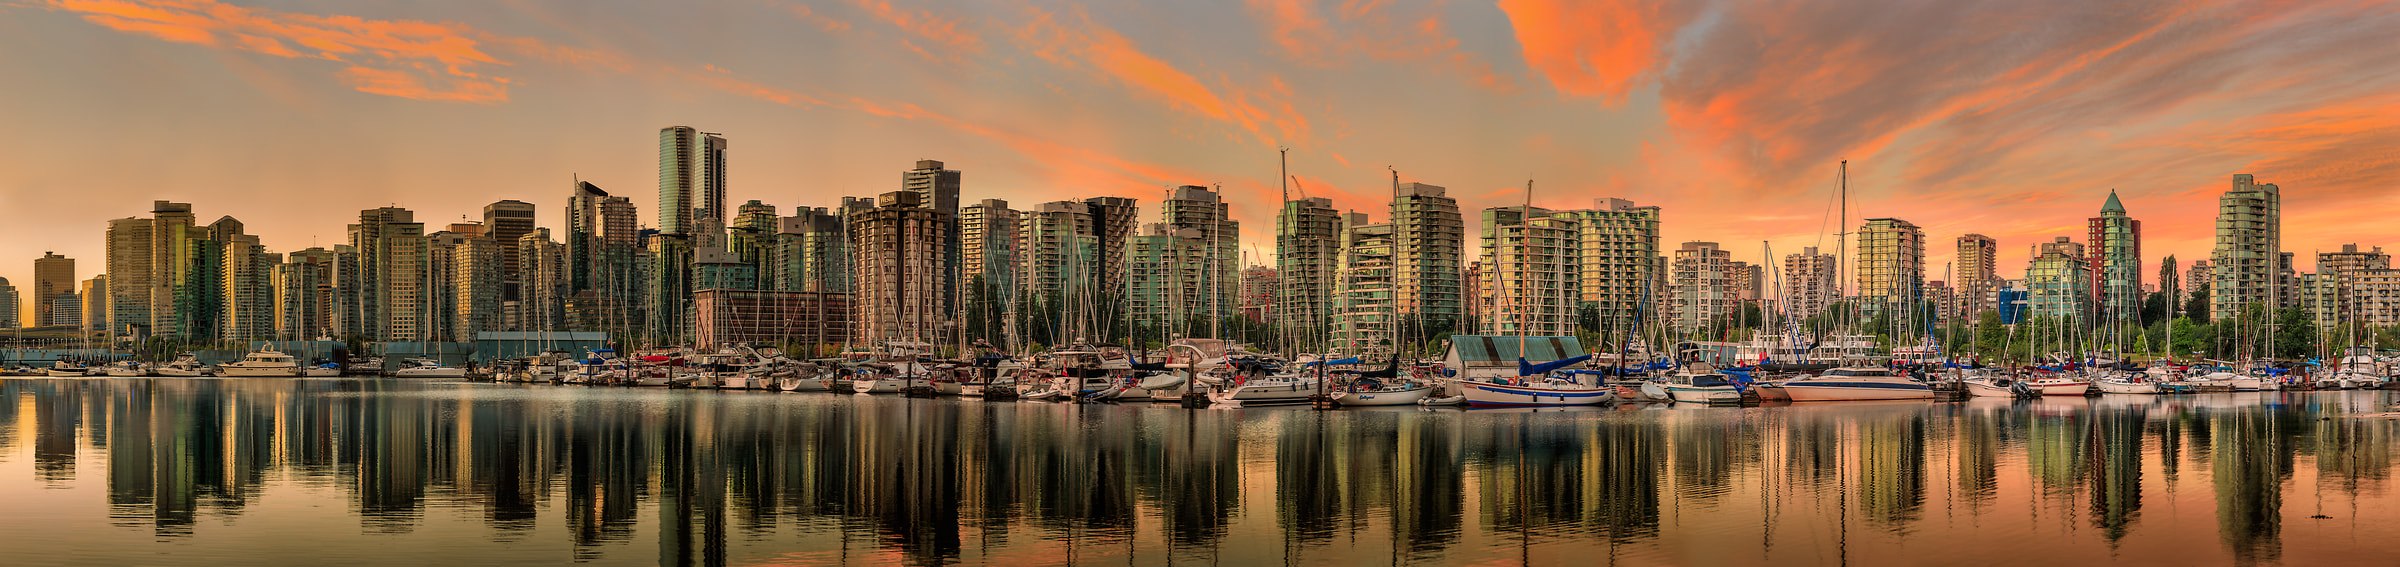 887 megapixels! A very high resolution, panorama VAST photo print of the Vancouver skyline at sunrise; photograph created by Scott Dimond in Coal Harbour, Vancouver, BC, Canada.